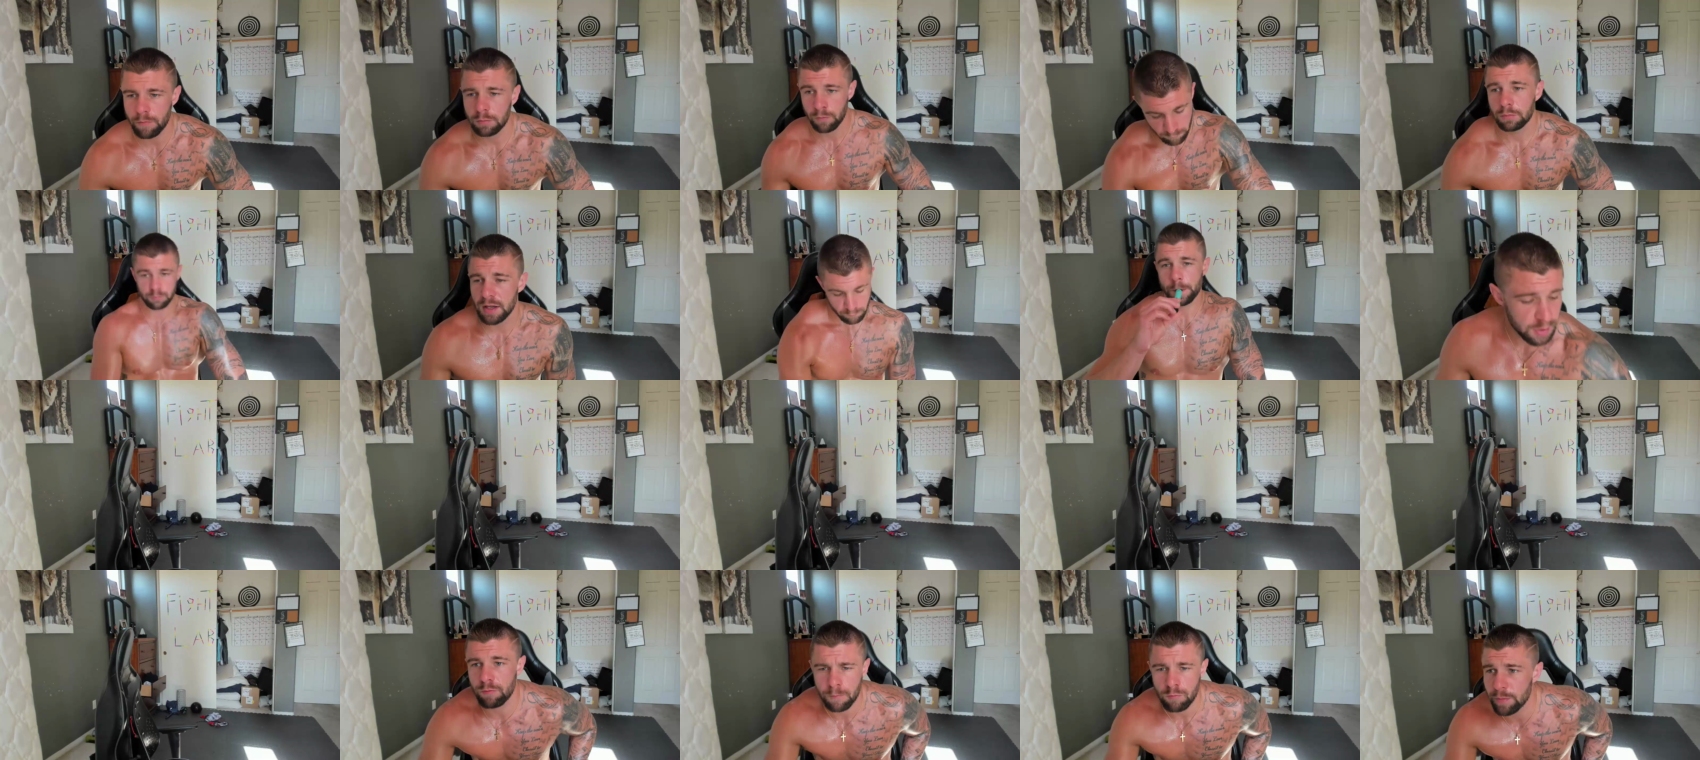 theufcfan_8181  11-05-2023 Males sexybody